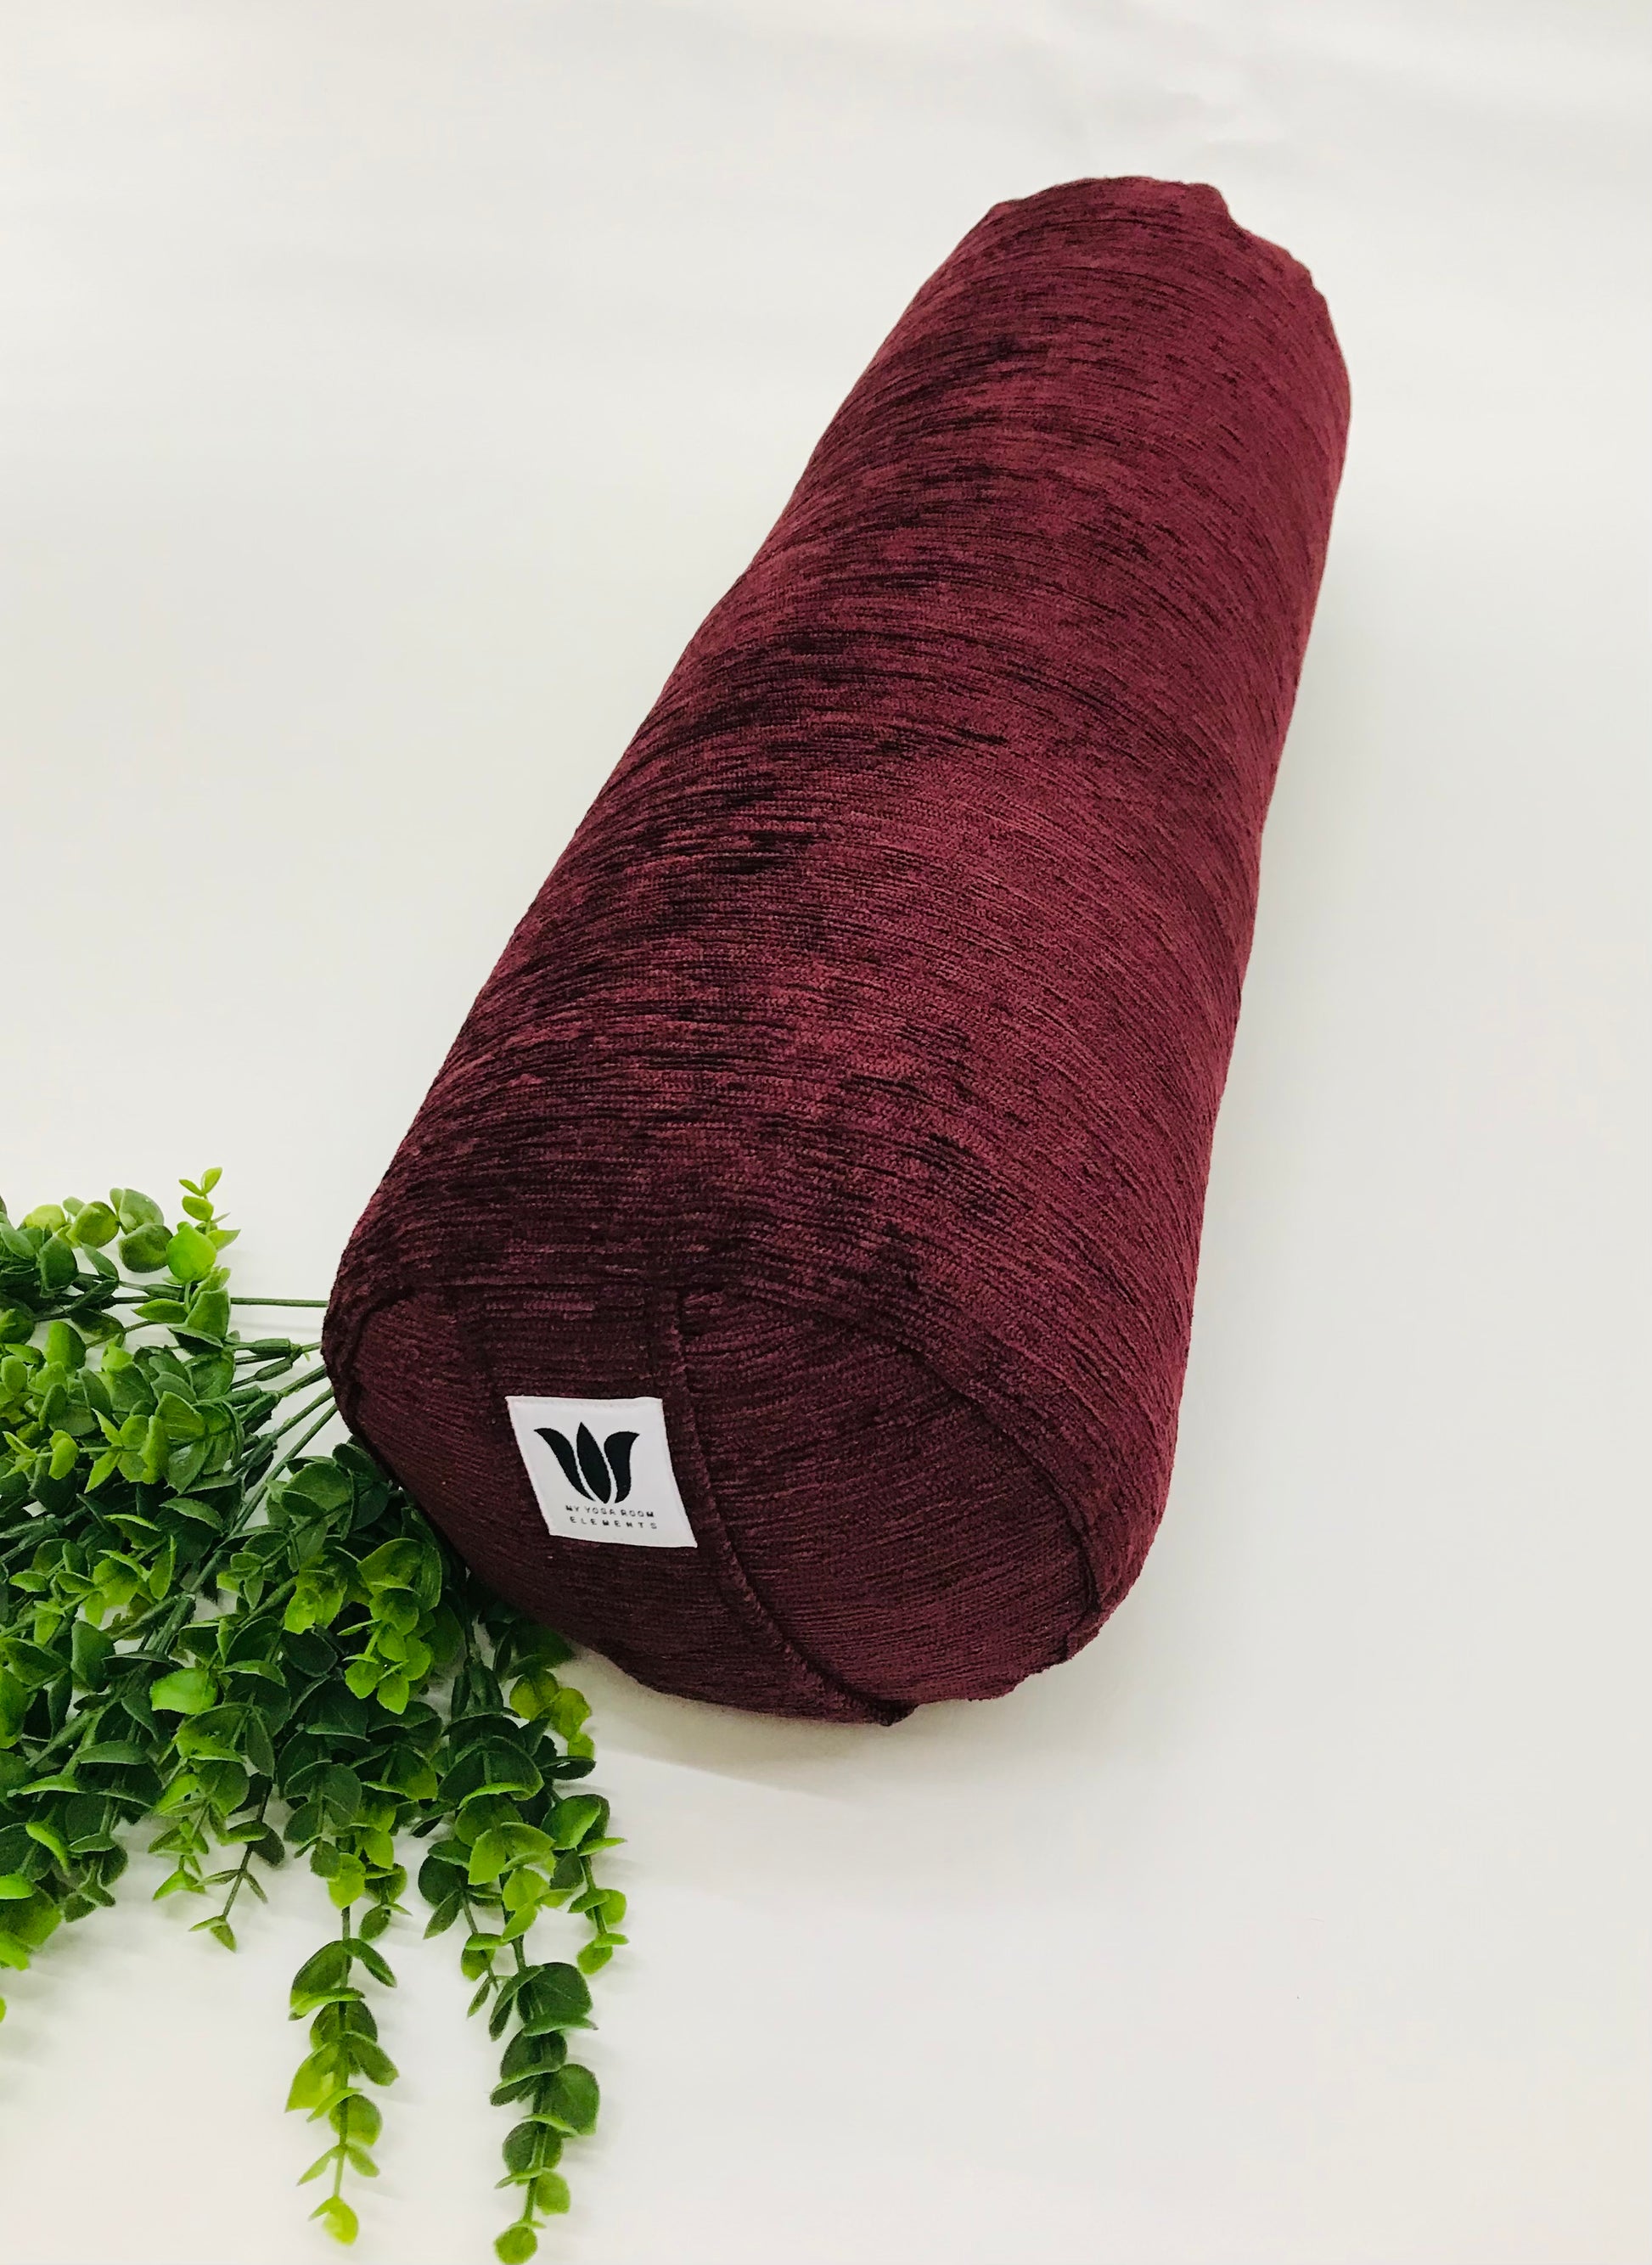 Round yoga bolster in durable plush, dark purple solid print fabric. Allergy conscious fill with removeable cover. Made in Canada by My Yoga Room Elements